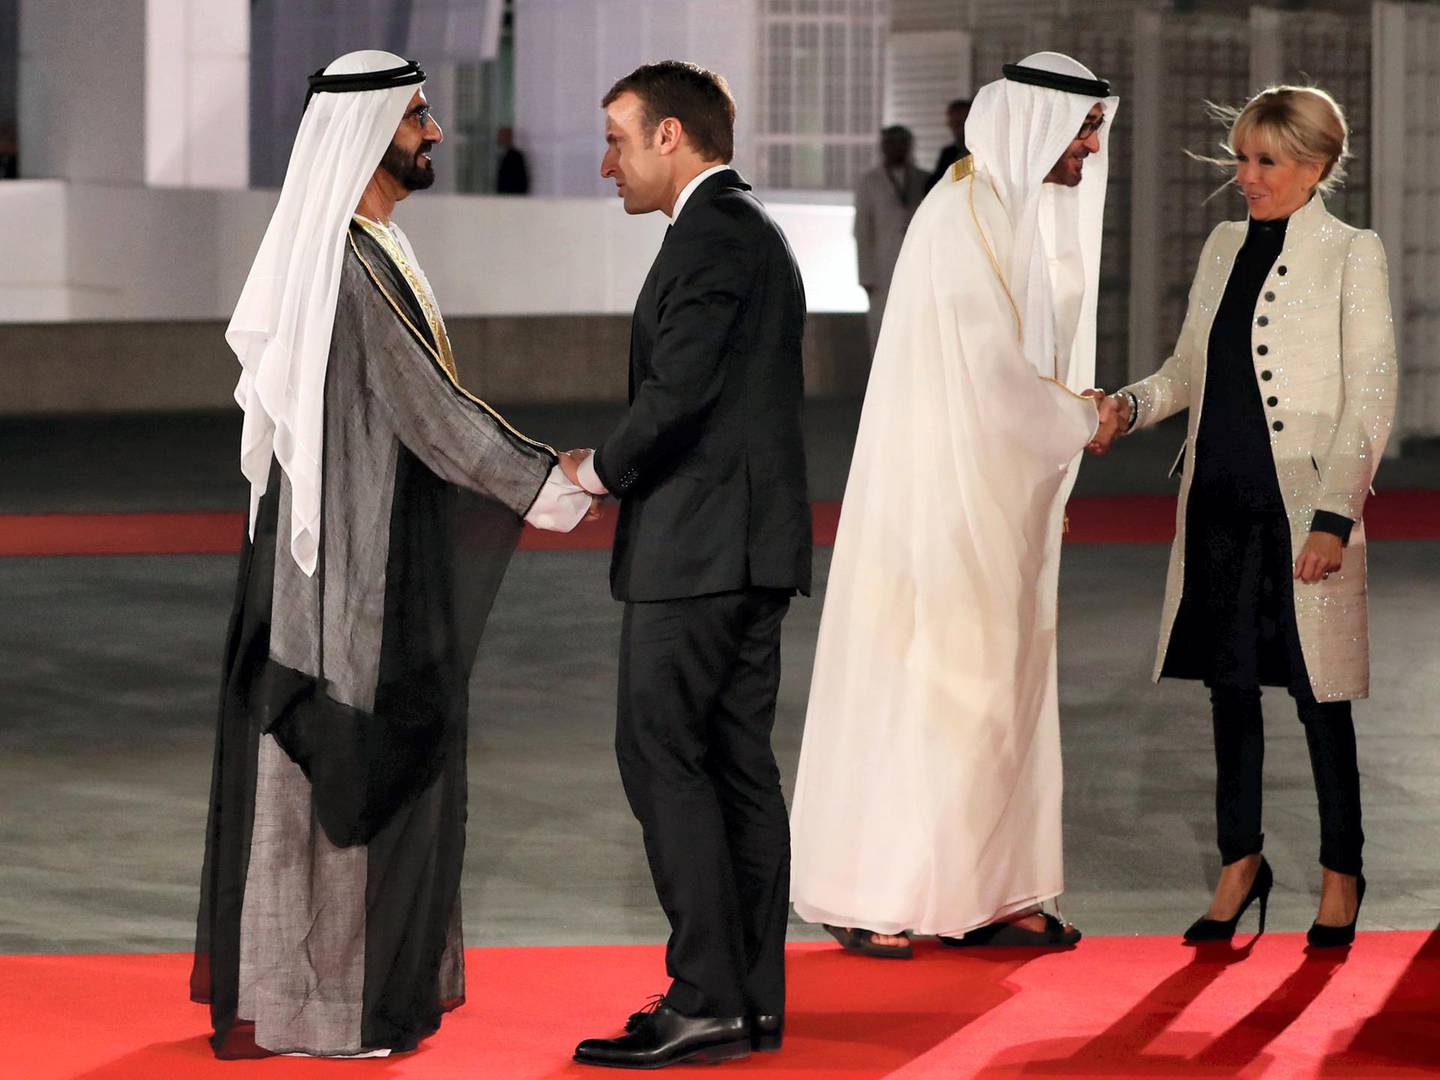 Ruler of Dubai Sheikh Mohammed bin Rashid al-Maktoum (L) shakes hands with French President Emmanuel Macron (C-L) as Abu Dhabi Crown Prince Mohammed bin Zayed Al-Nahyan (2nd R) greets the president's wife, Brigitte Macron, at the entrance of the Louvre Abu Dhabi Museum on November 8, 2017 during its inauguration on Saadiyat island in the Emirati capital. - More than a decade in the making, the Louvre Abu Dhabi is opening its doors bringing the famed name to the Arab world for the first time. (Photo by KARIM SAHIB / AFP)